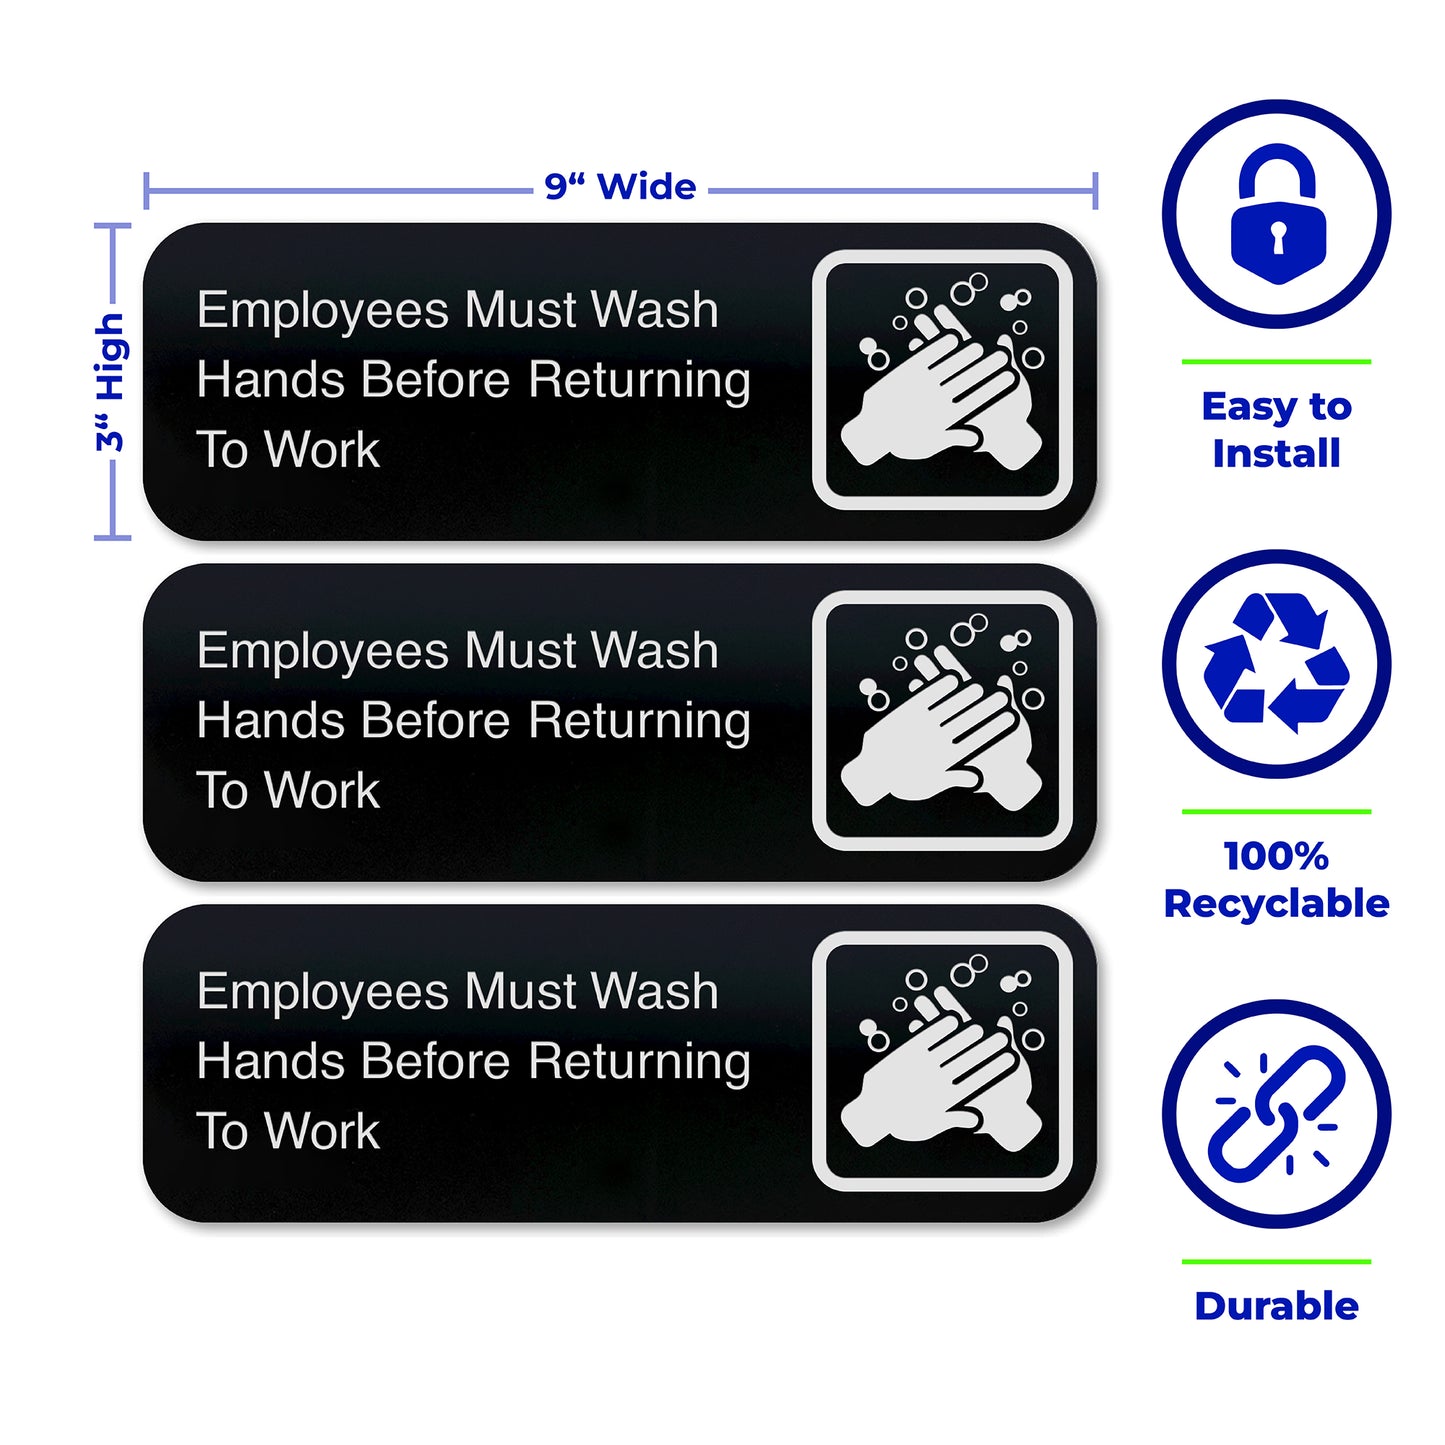 EMPLOYEES MUST WASH HANDS BEFORE RETURNING TO WORK, Black Acrylic, White Text, 9"x 3" - SET OF 3